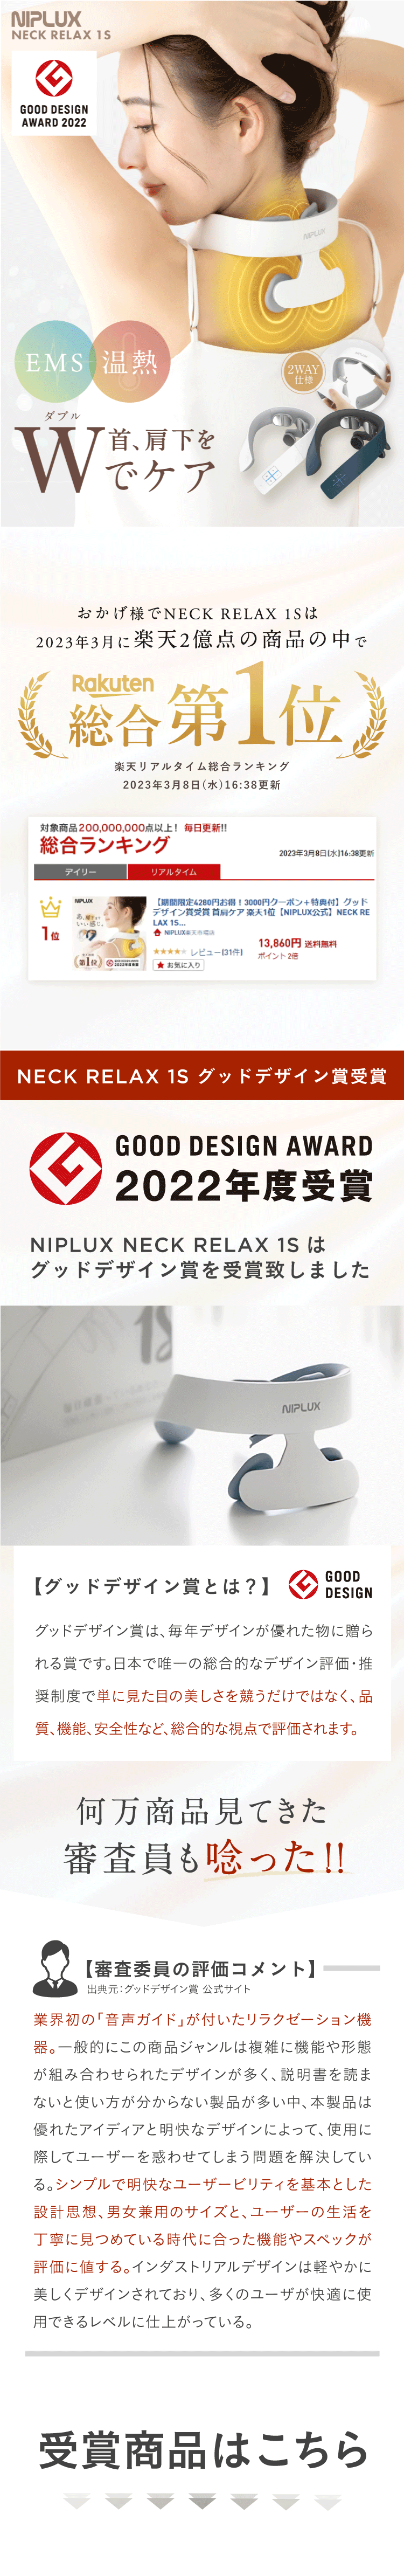 NIPLUX NECK RELAX 1S│独自EMSと温熱機能│首と肩下をダブルでケア 